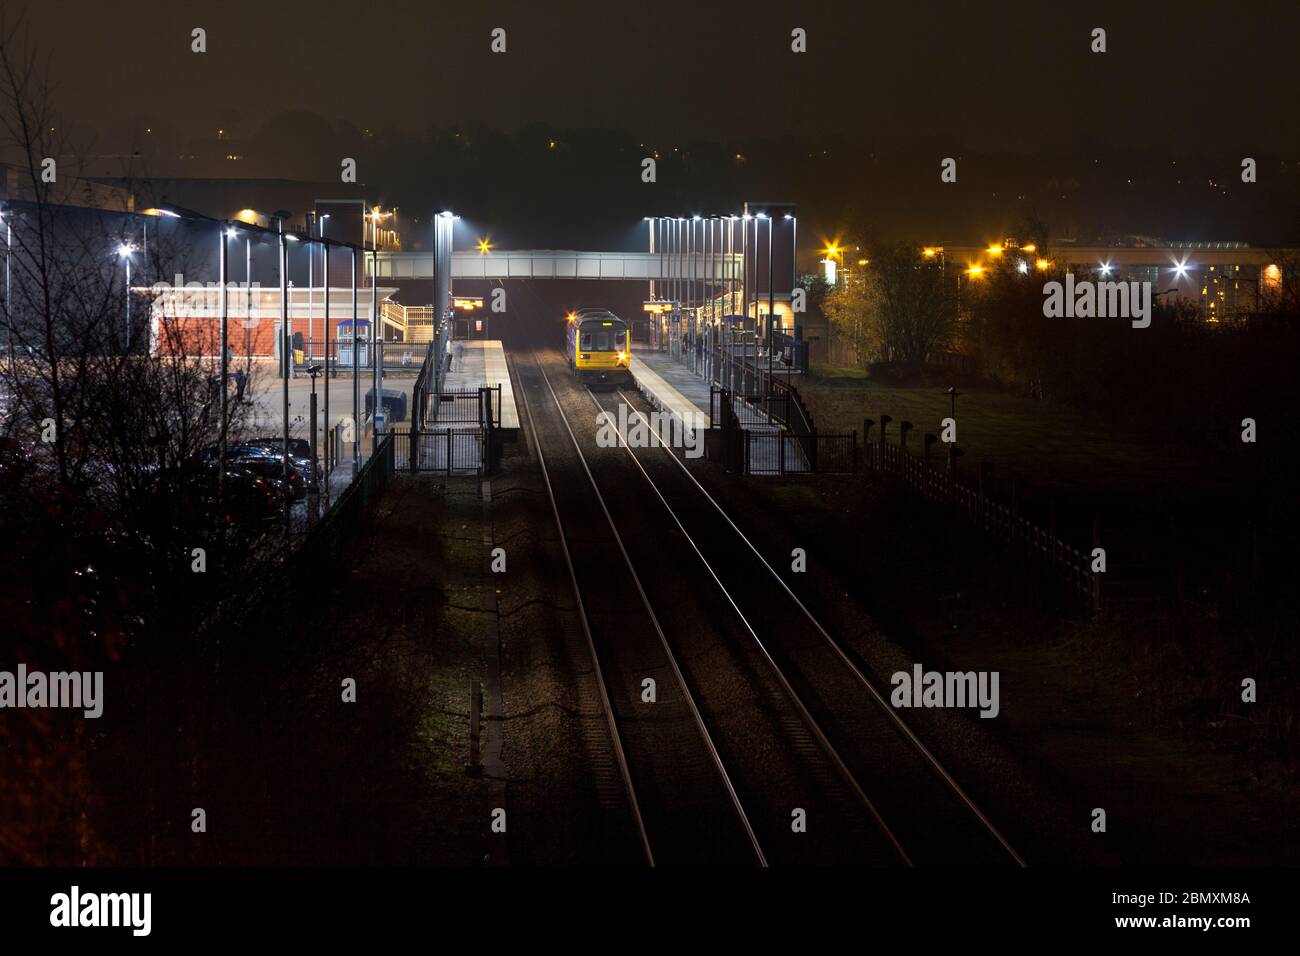 Northern rail class 142 pacer train calling at  Buckshaw parkway railway station on the Bolton to Preston railway line at night Stock Photo